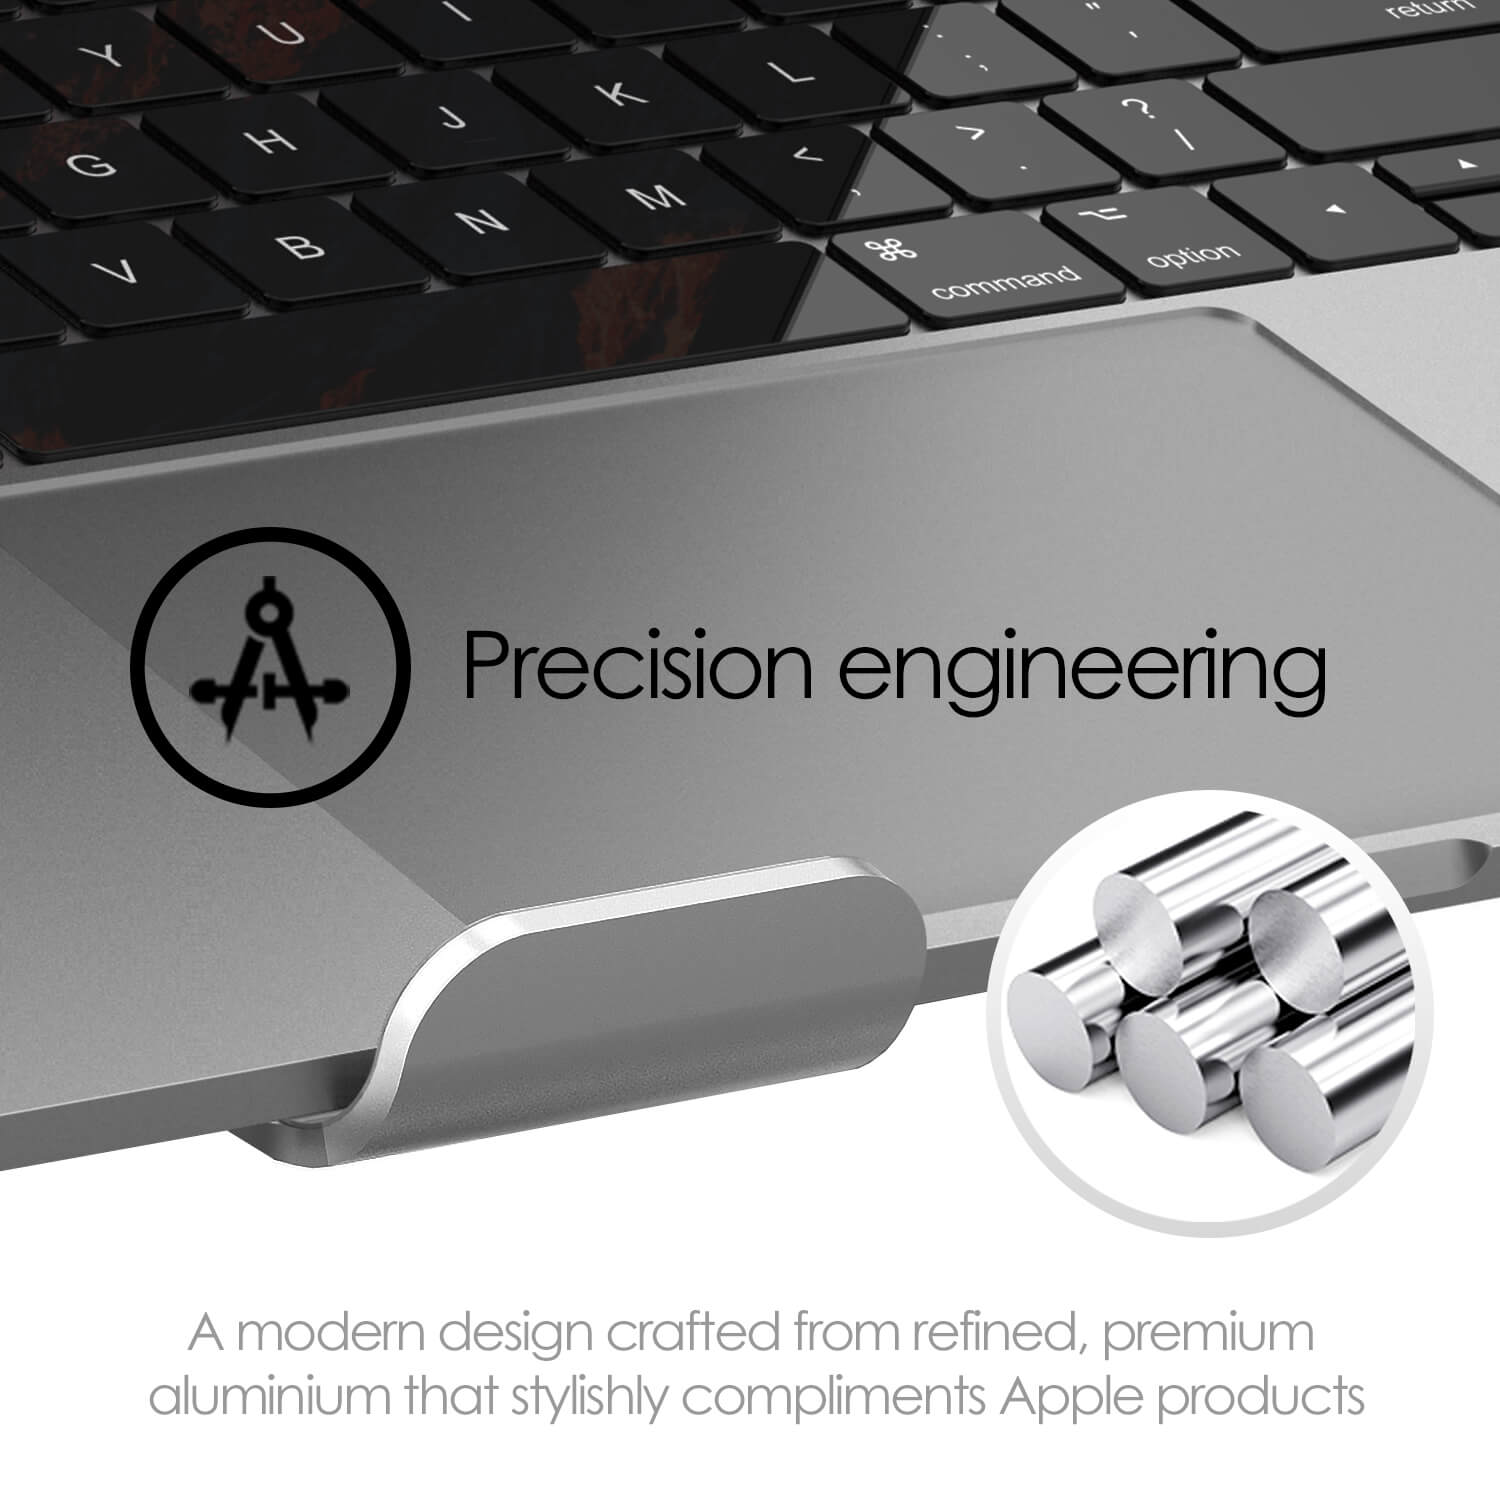 A close up of a laptop stand showing the craftsmanship.  An Icon shows a draughtsman's compass with text that reads "precision engineering".  more text at the bottom reads "A modern design crafted from refined premium aluminium that stylishly compliments Apple products".